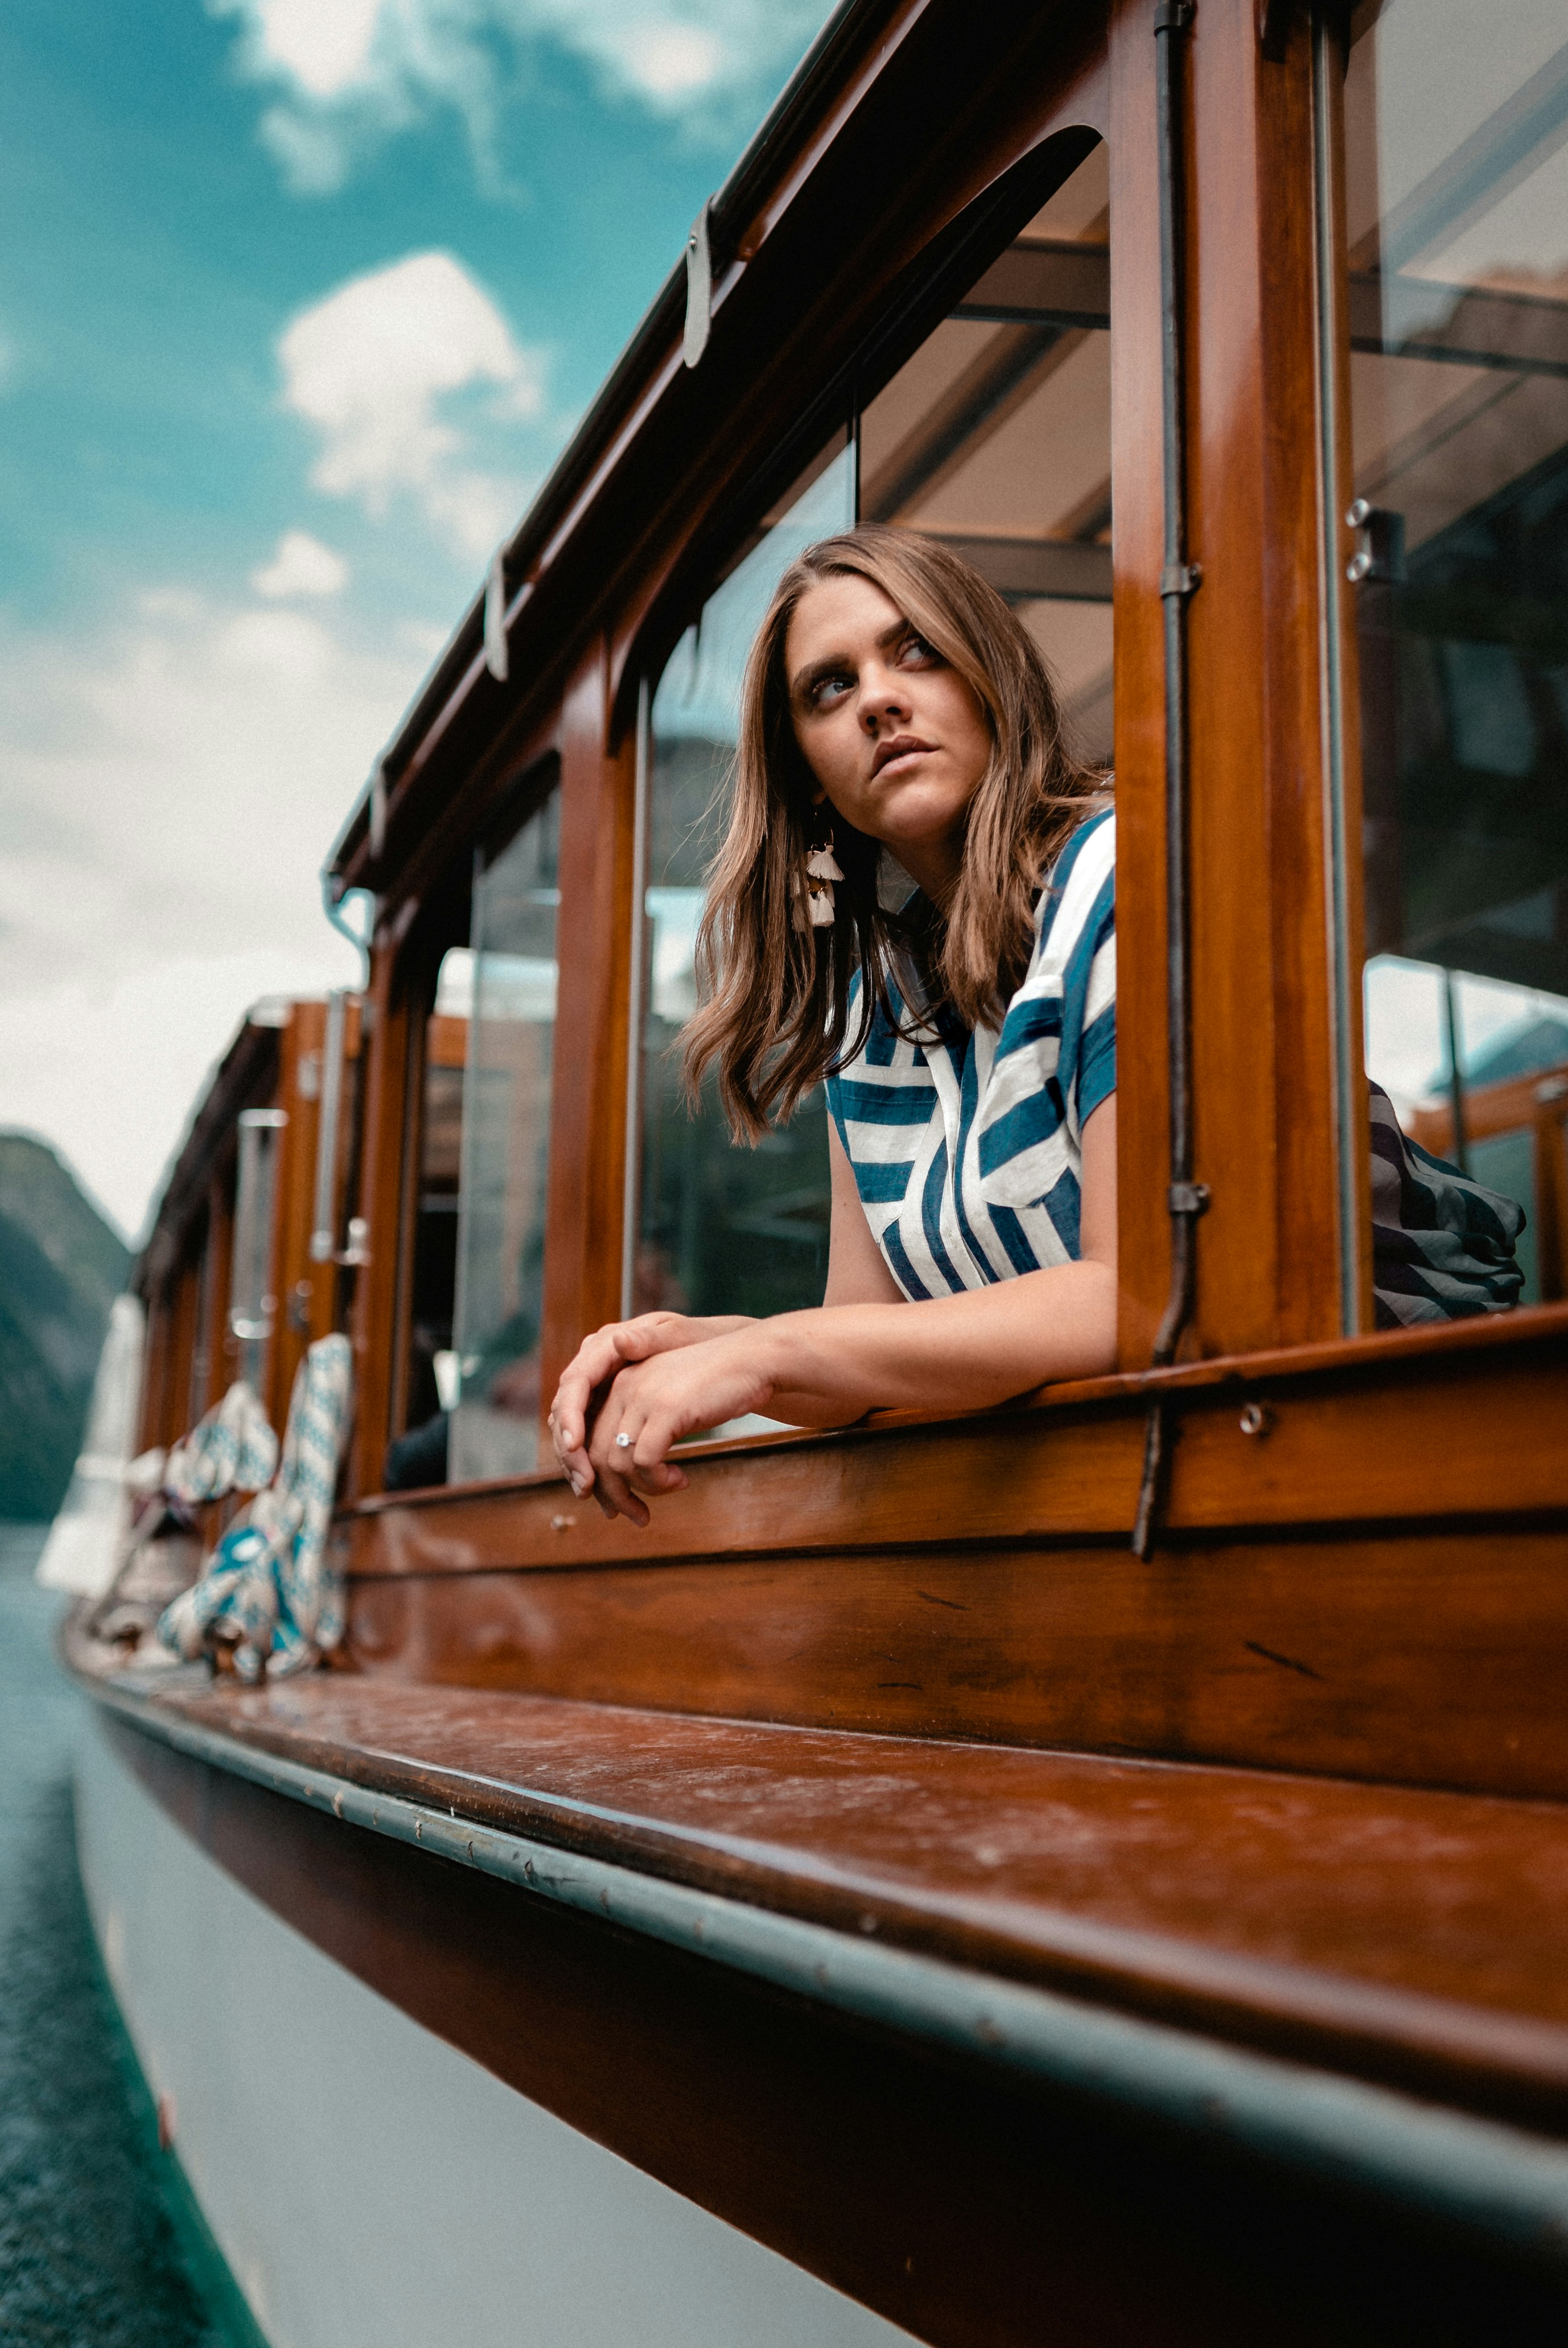 woman in blue and white striped shirt sitting on brown wooden vehicle